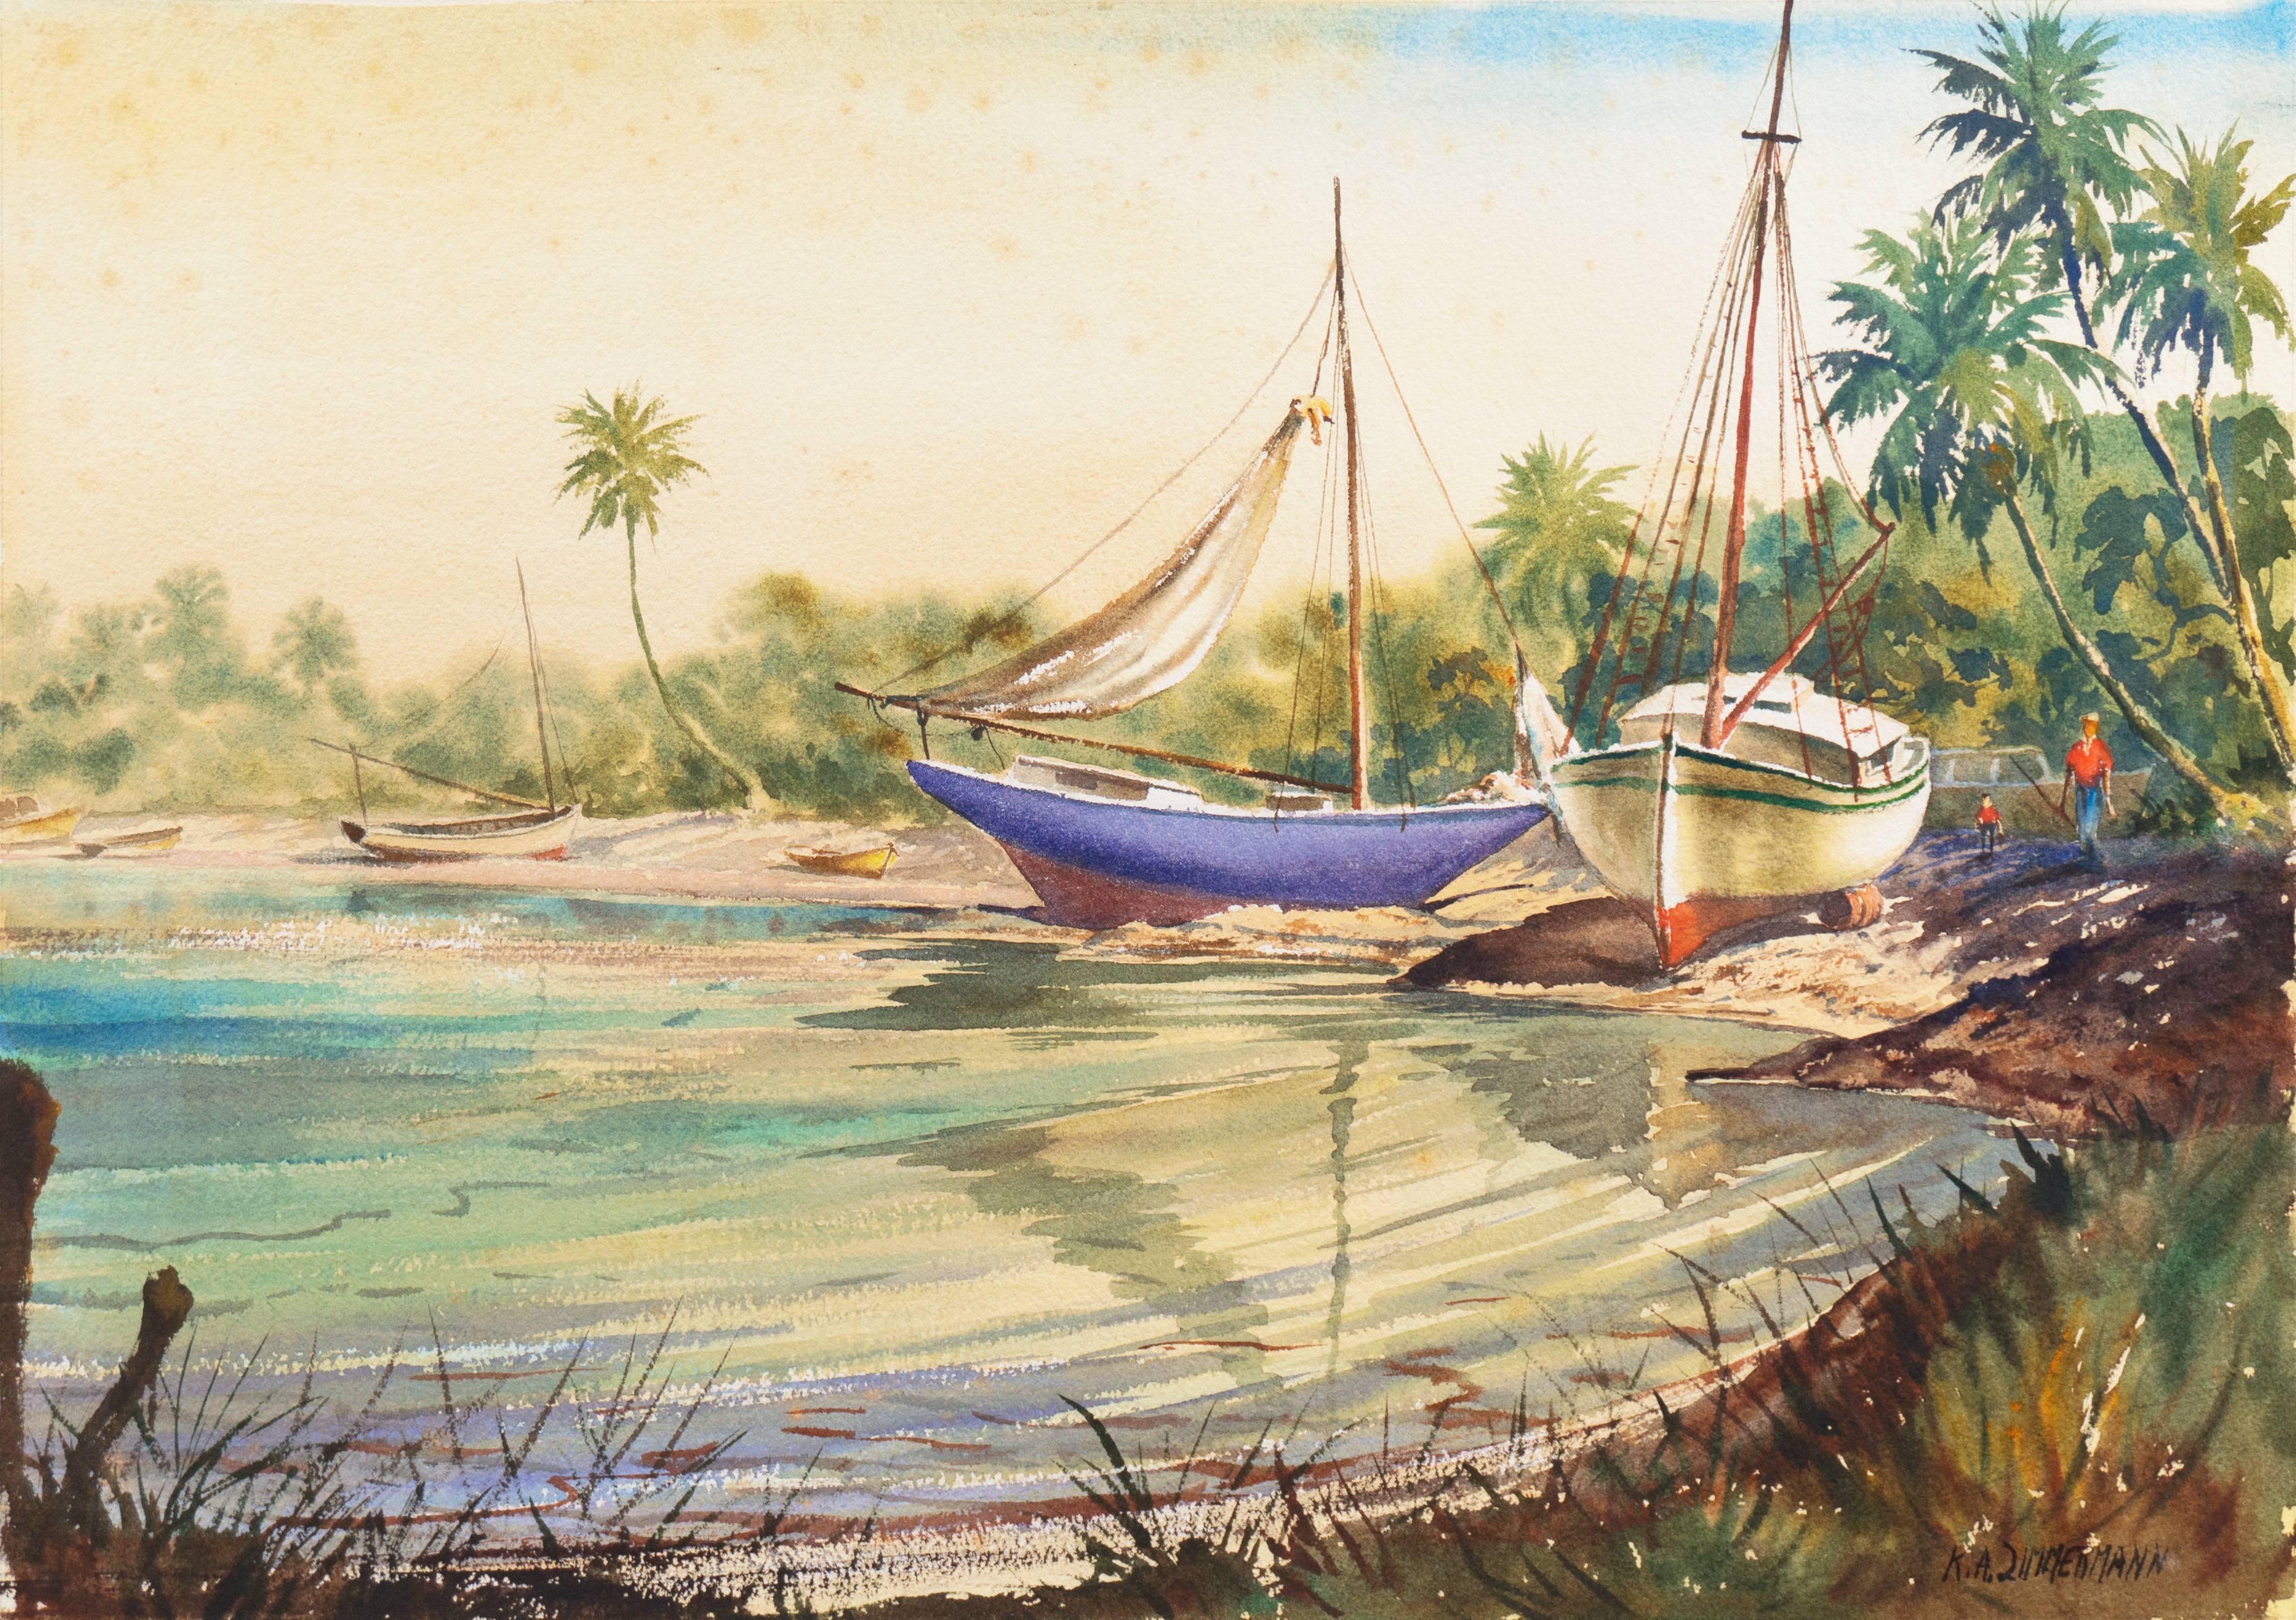 'Sailboats Drawn up in a Tropical Inlet', Florida